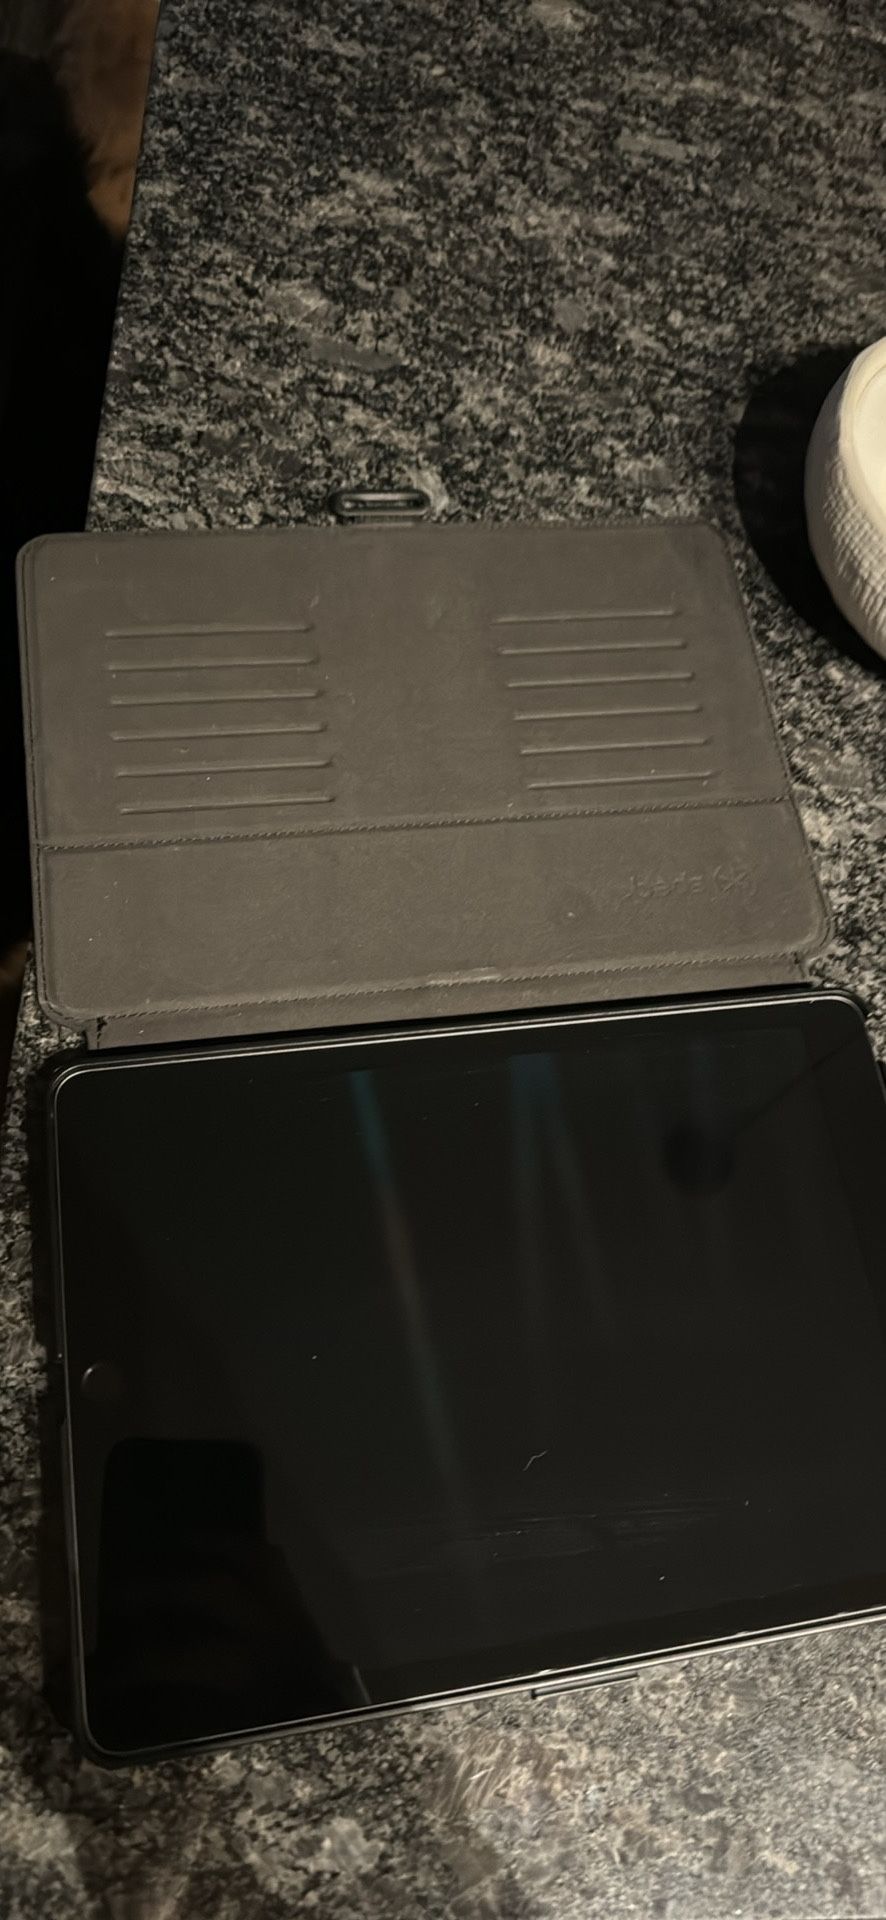 9th Gen Apple iPad 64gb Space Grey With Case 